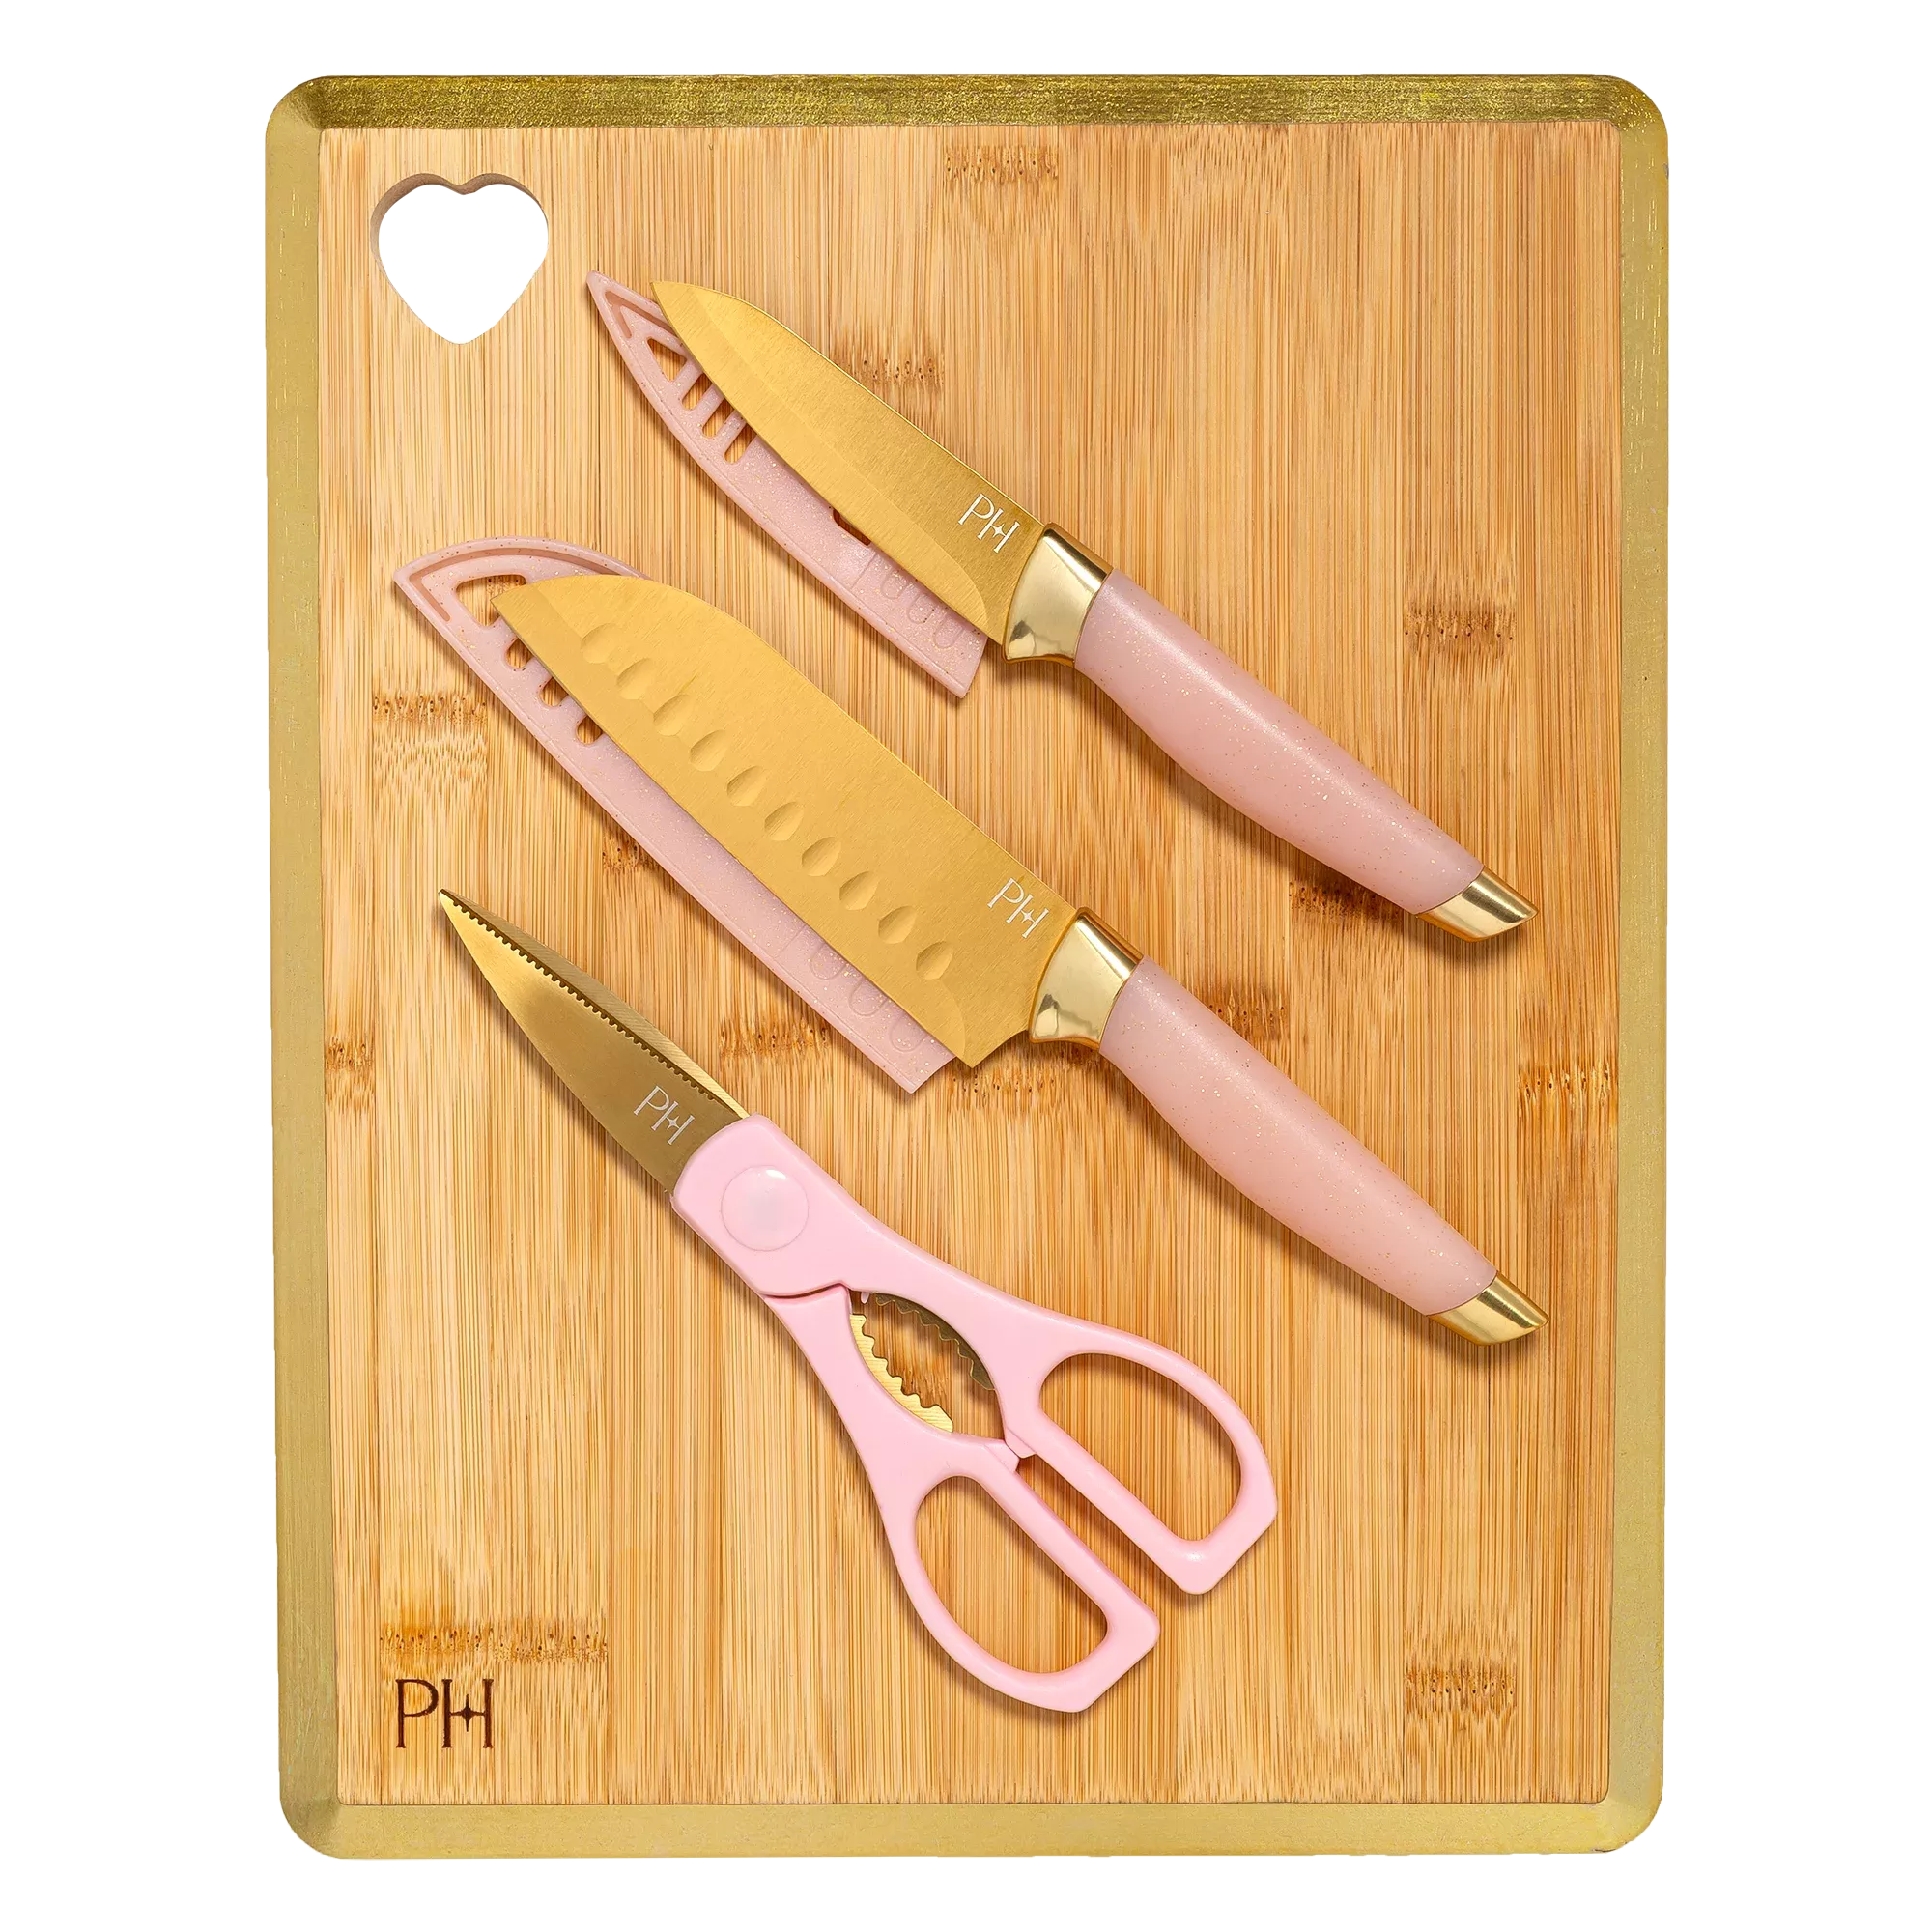 Paris Hilton 7-Piece Bamboo Heart Cutting Board and Stainless Steel Cutlery  Set, Charcoal Gray